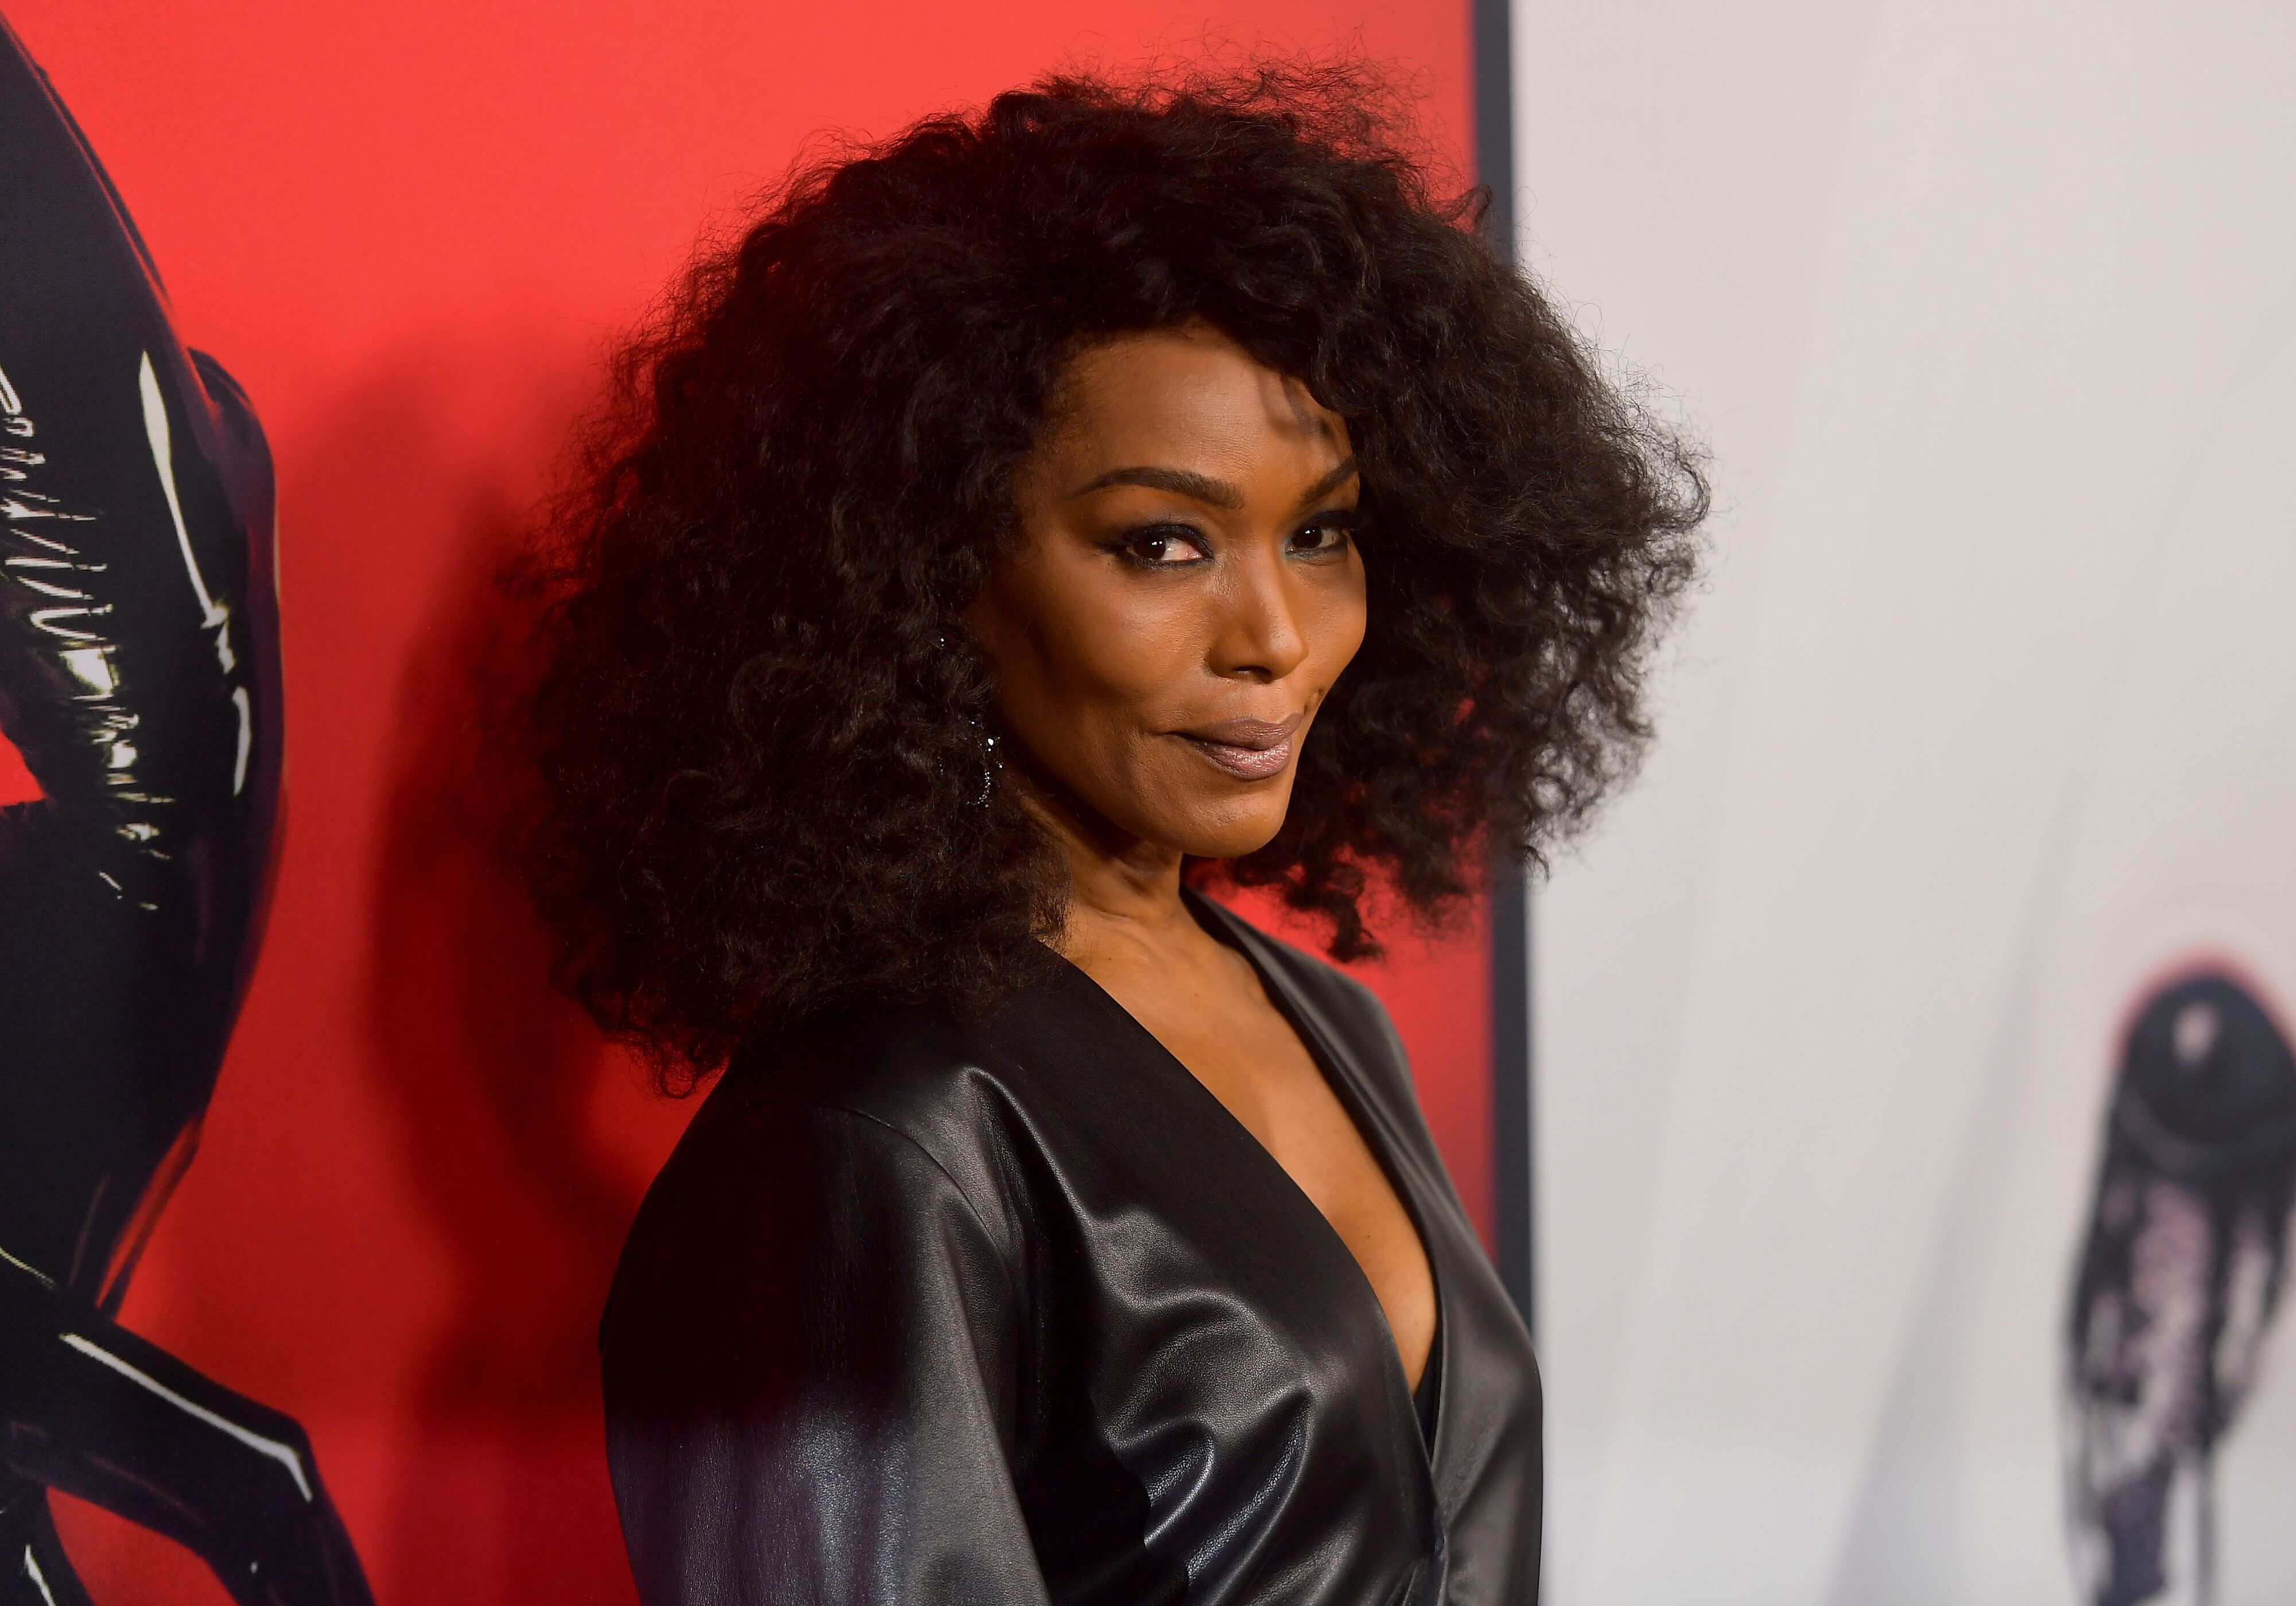 Angela Bassett attends the 100th episode celebration of FX's "American Horror Story" at Hollywood Forever on October 26, 2019. | Photo: Getty Images